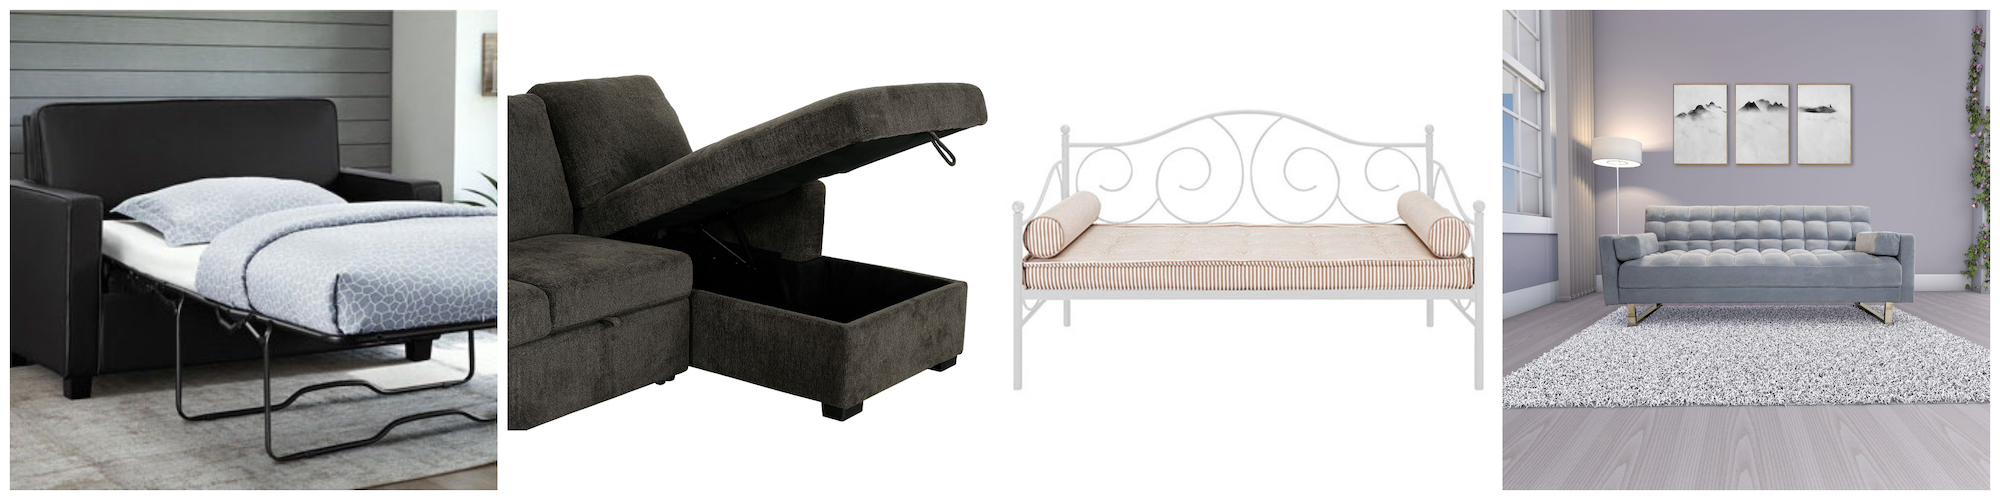 Sofa bed buying guide